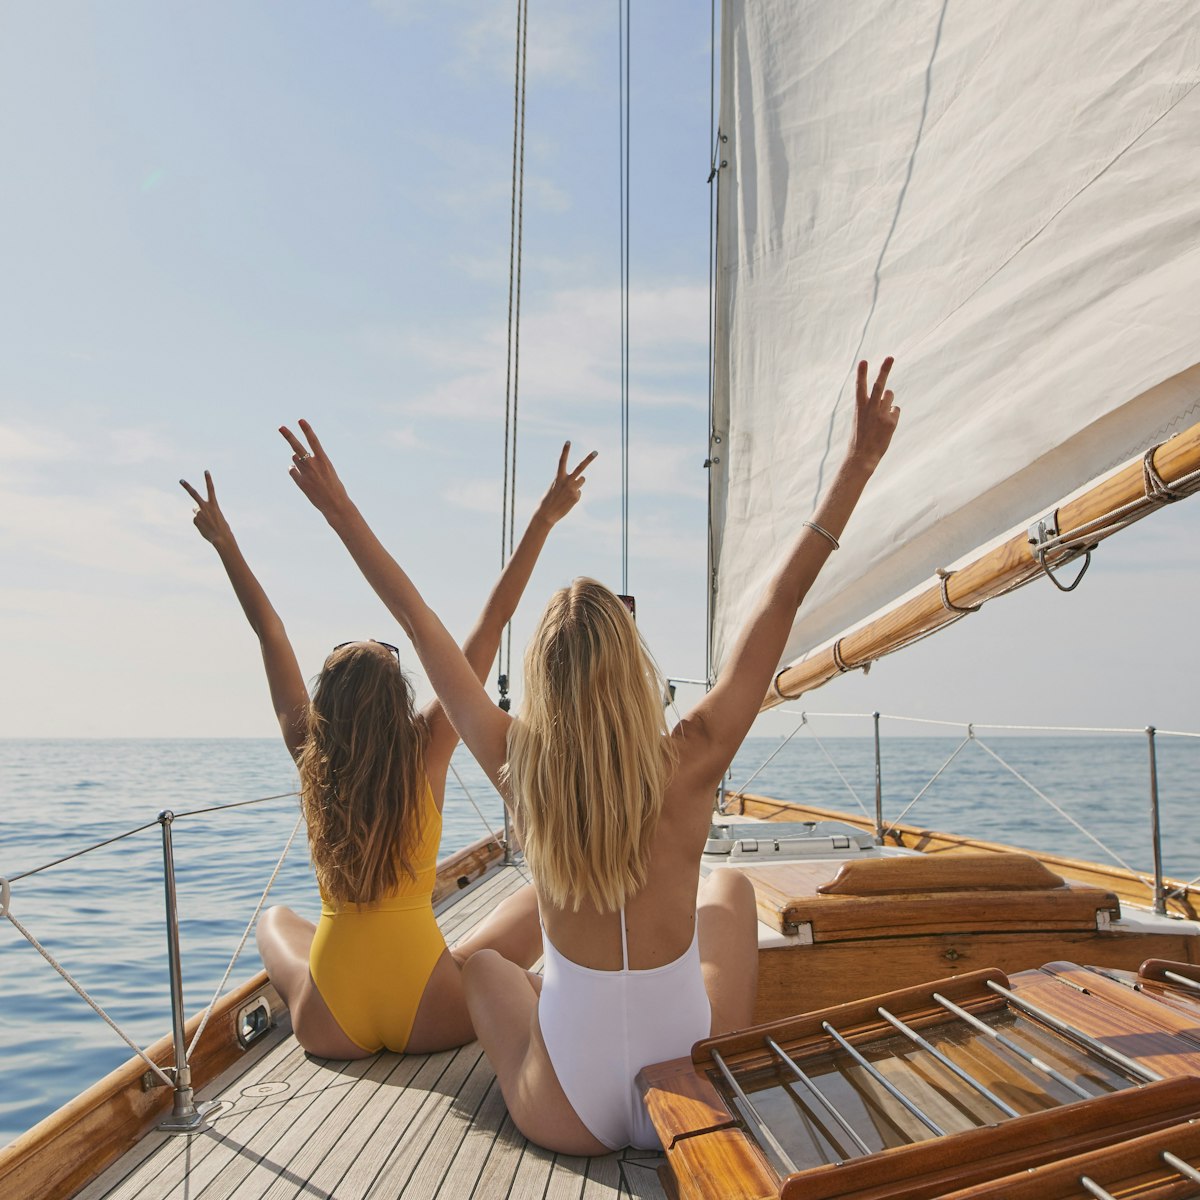 Women are increasingly taking to the seas, and for good reason. Sailing is a great way to explore new places, get some exercise, and have a lot of fun.